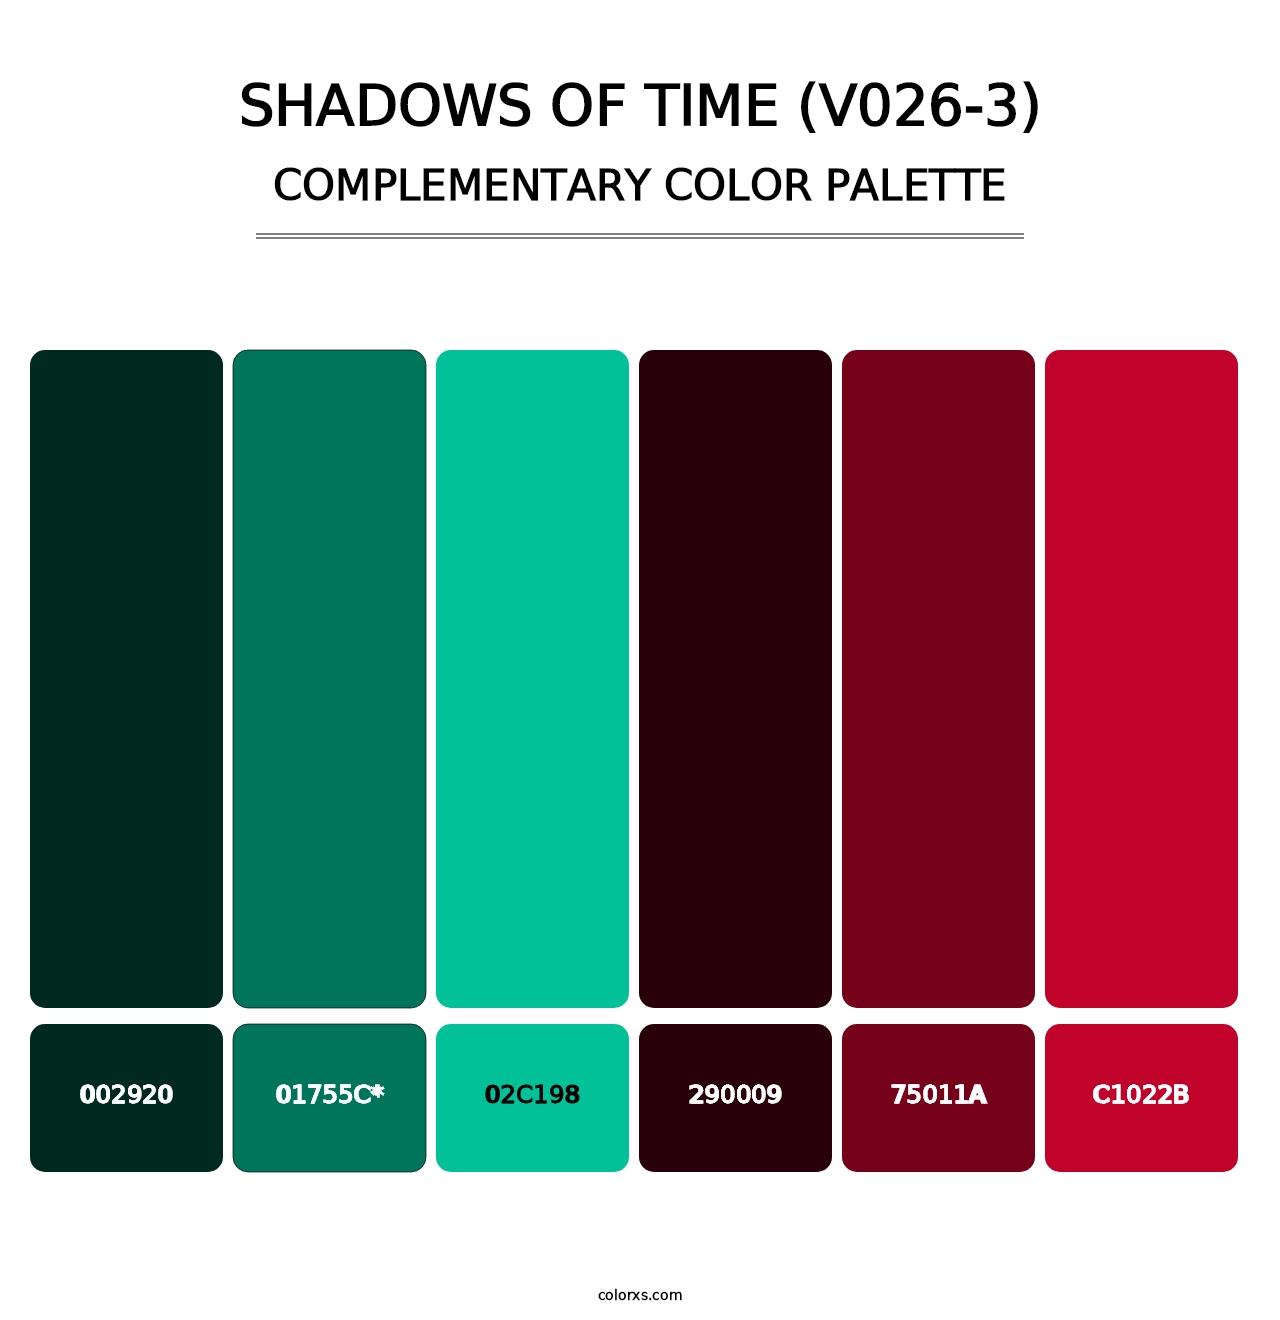 Shadows of Time (V026-3) - Complementary Color Palette